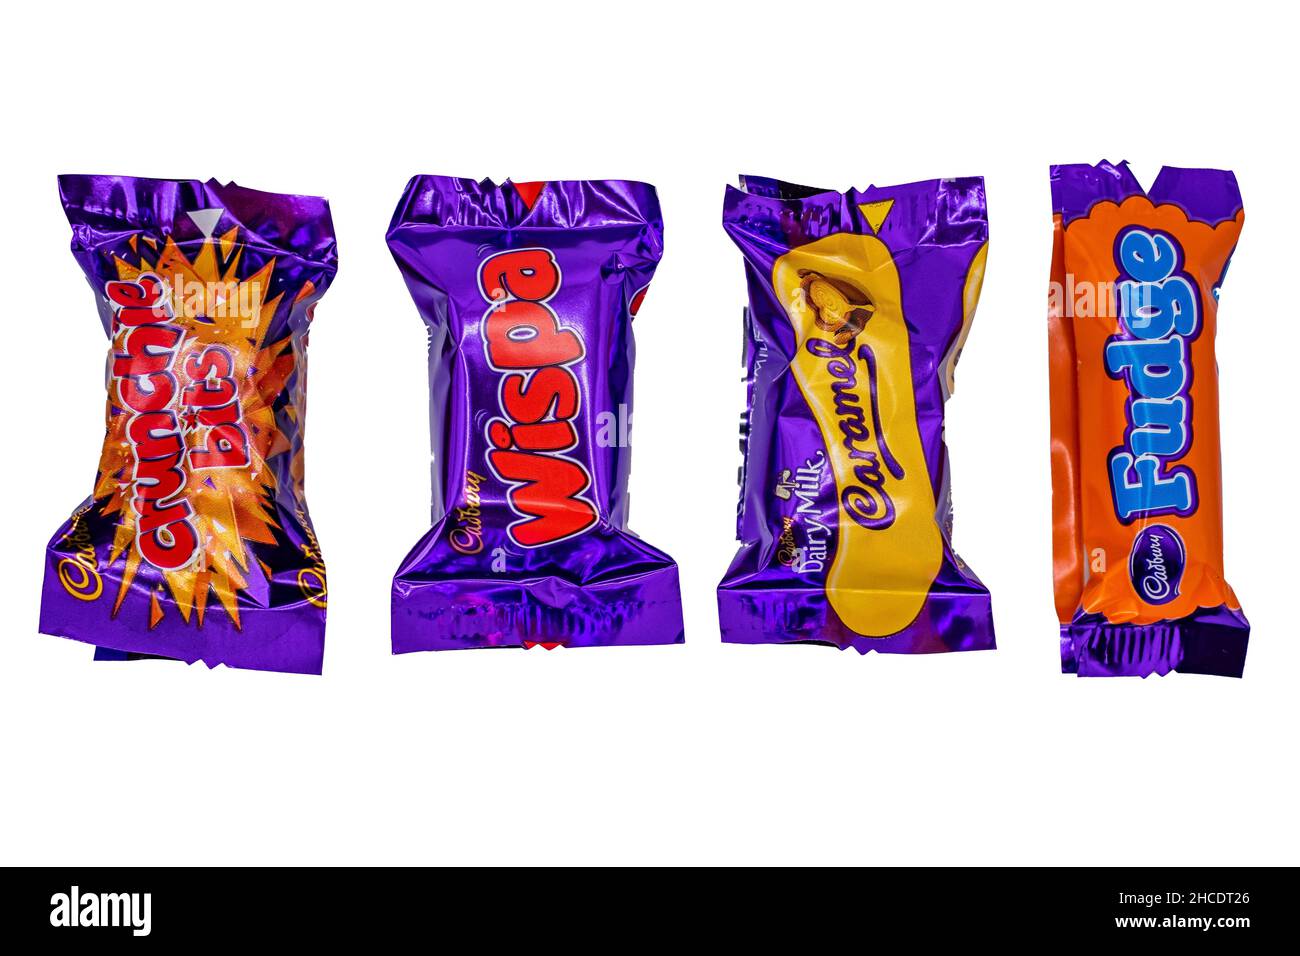 Norwich, Norfolk, UK – December 2021. Various individual bars of chocolate from a box of Cadbury Heroes chocolates cut out and isolated on a plain whi Stock Photo